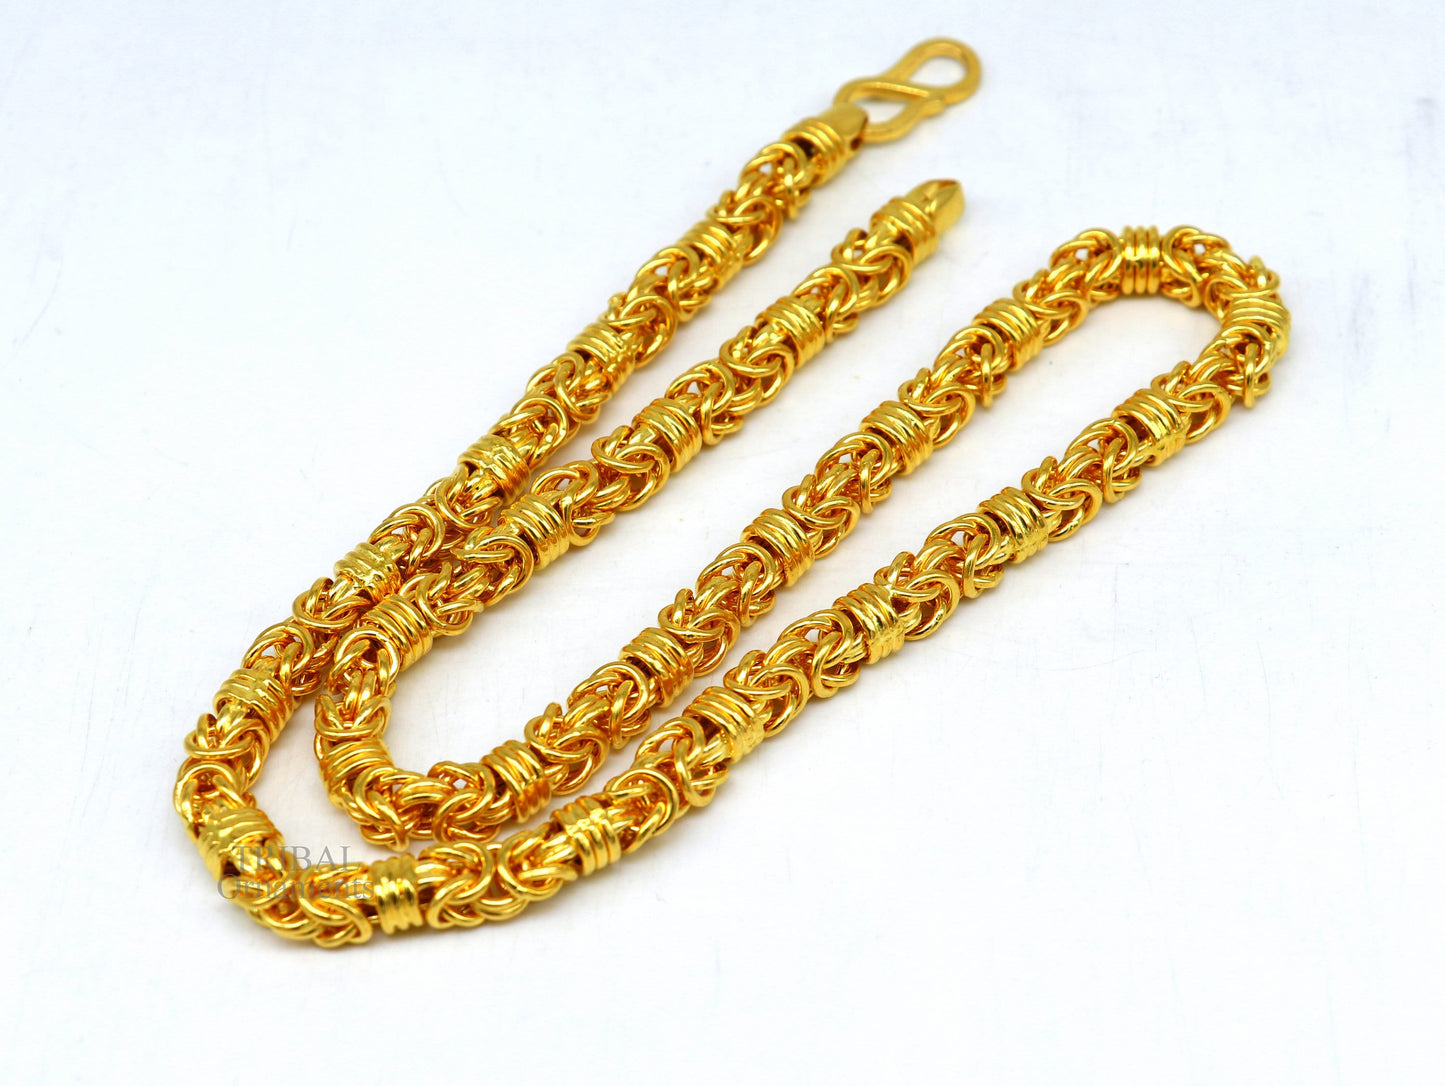 Exclusive 18 kt 30 inches yellow gold handmade fabulous byzantine stylish chain necklace unisex gifting jewelry best gifting wedding ch539 - TRIBAL ORNAMENTS